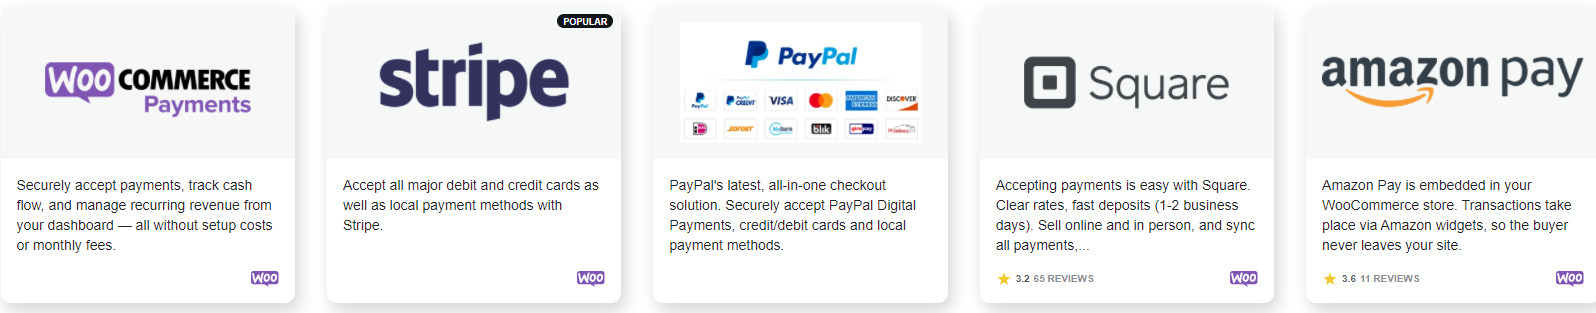 WooCommerce Payment Options